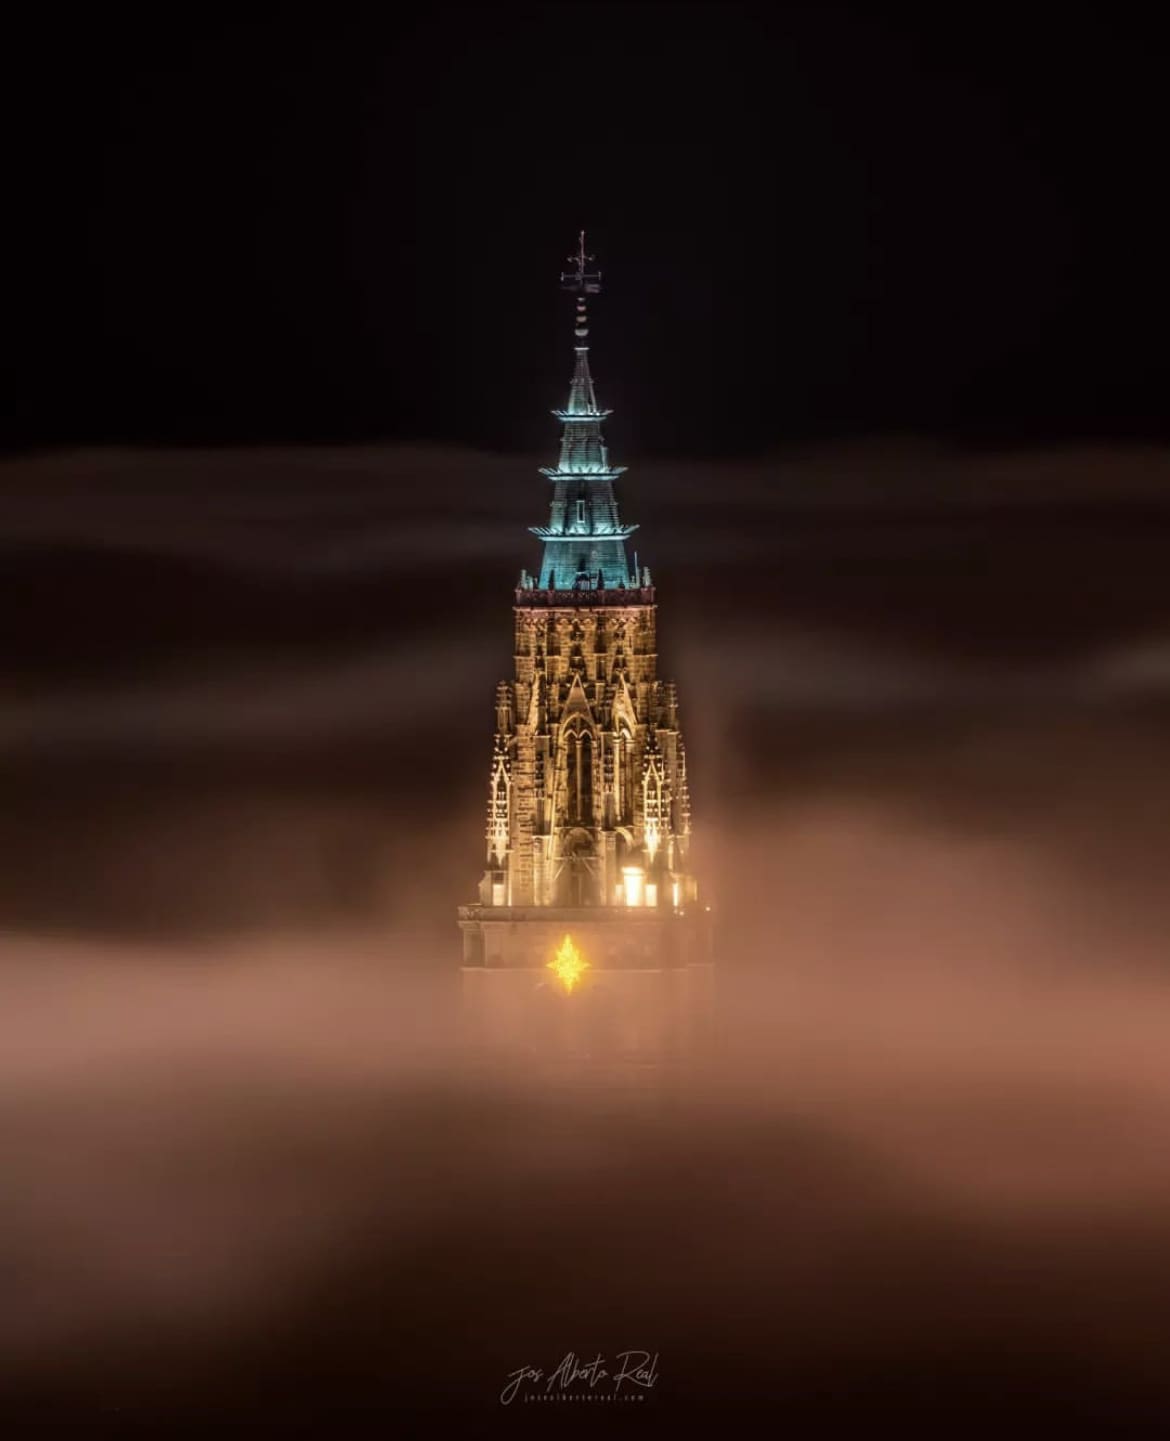 Catedral de Santa Maria de Toledo poking out through the clouds - Must-See Tourist Attractions in Spain